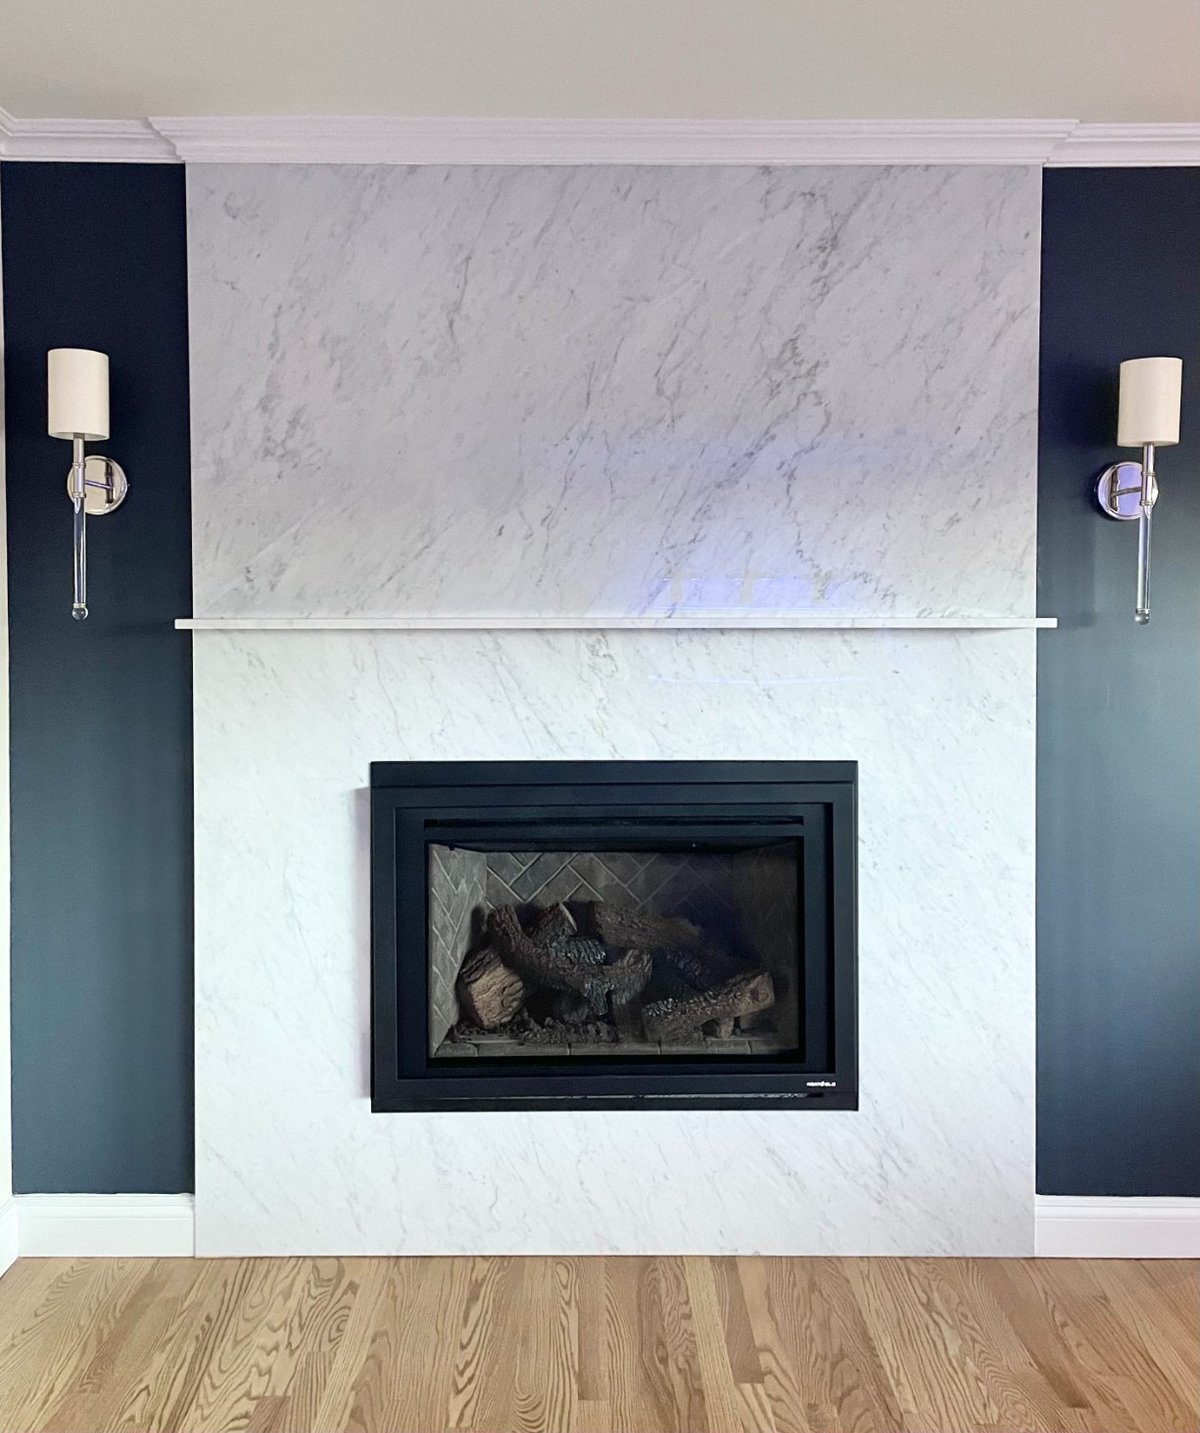 Modern fireplace with stone surround in Islip, NY first floor remodel by Kuhn Construction